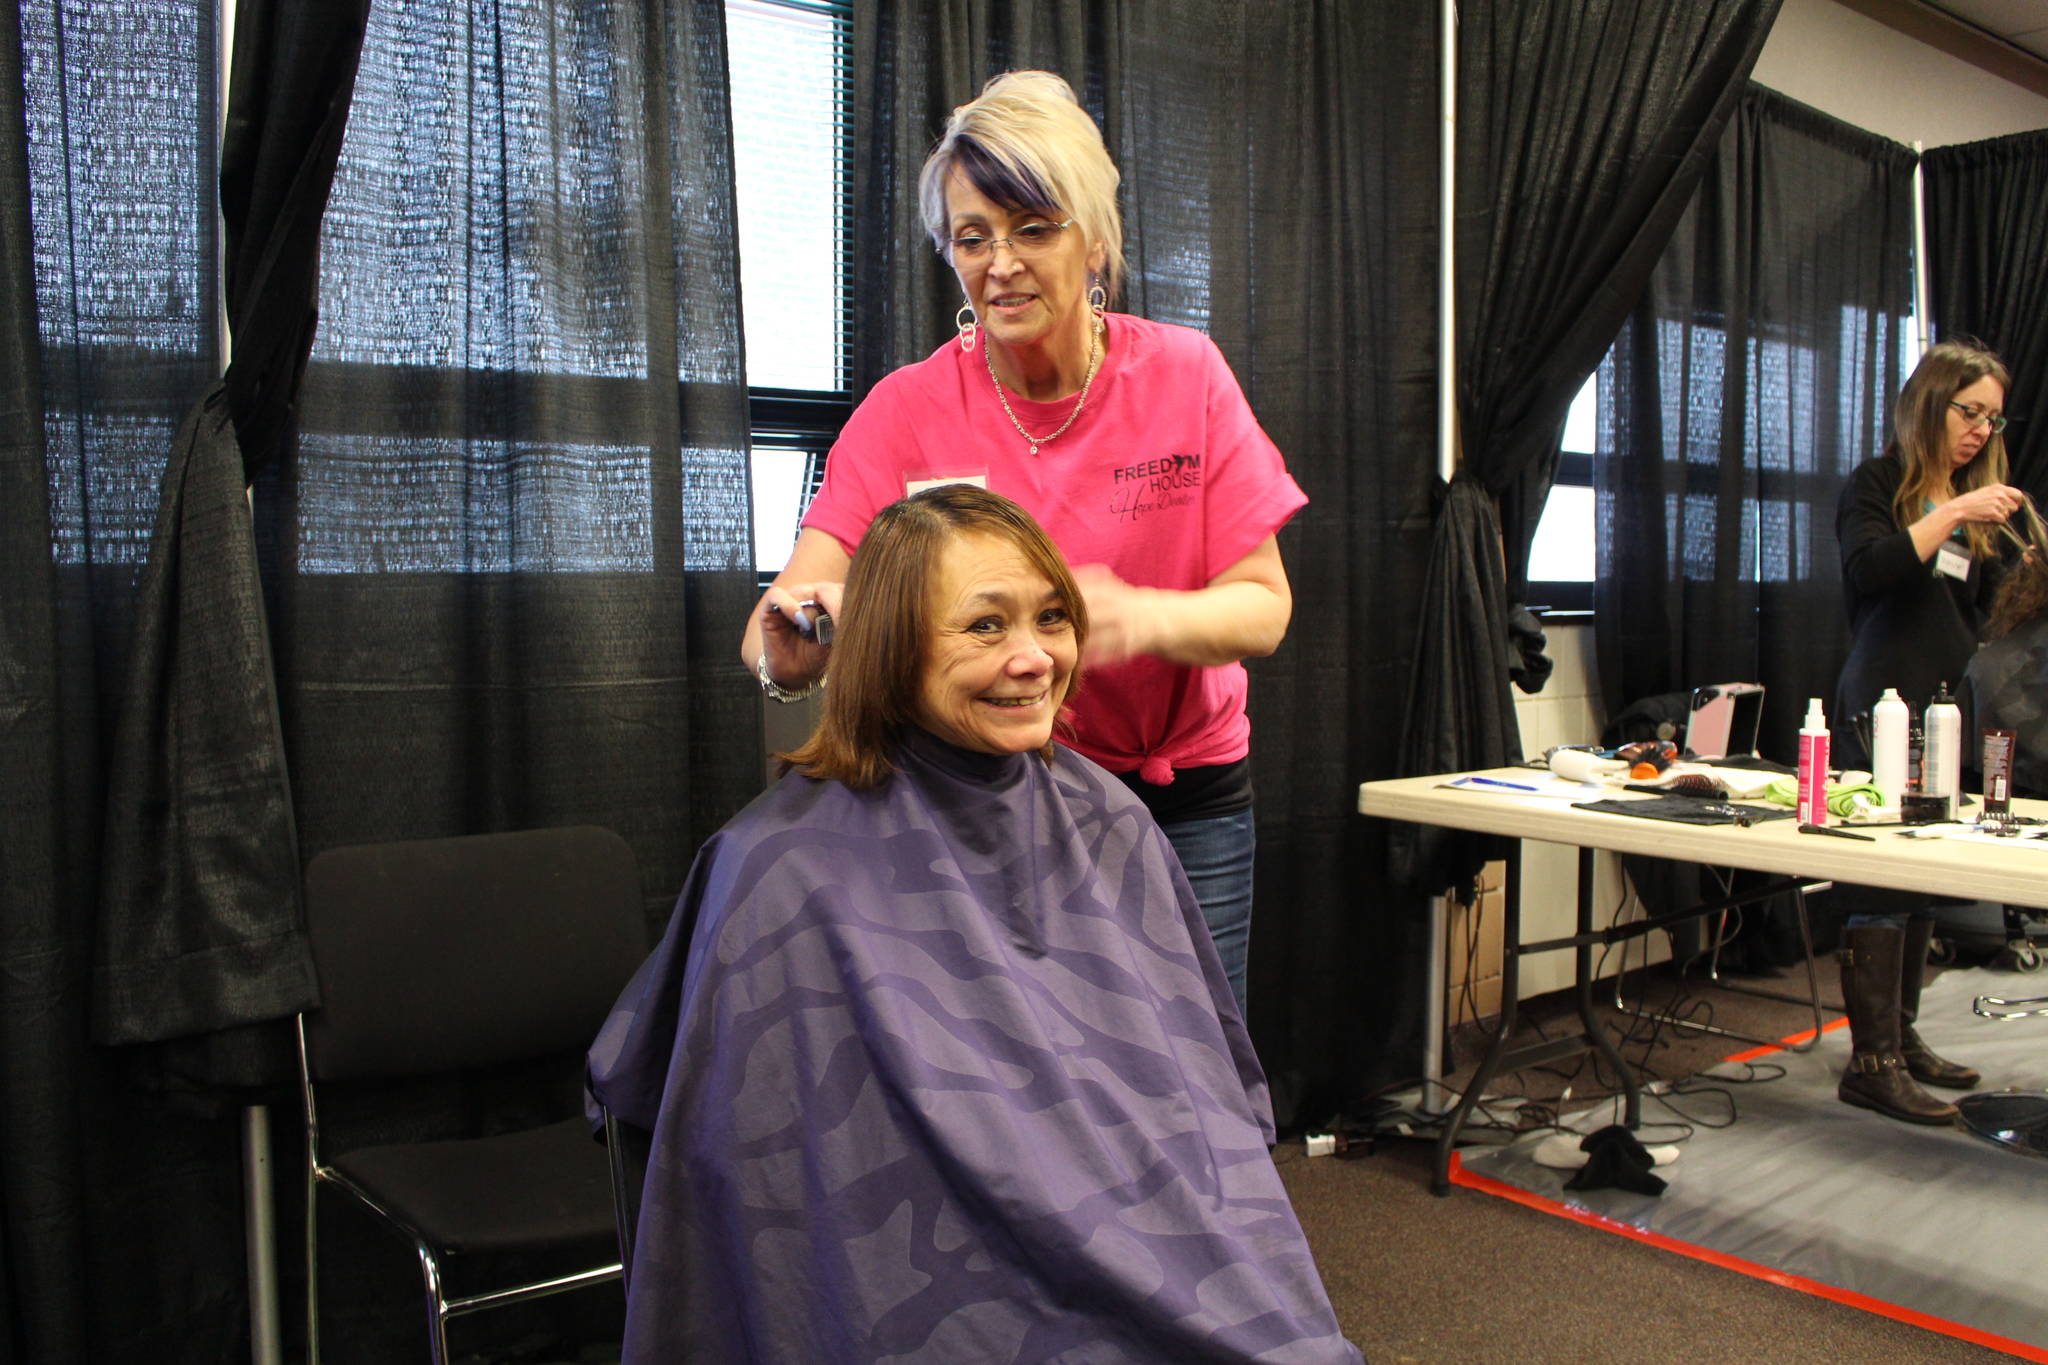 Sandra Groller gets her hair cut by Gail Kennedy of Freedom House during the 2020 Project Homeless Connect event at the Soldotna Regional Sports Complex in Soldotna, Alaska, on Jan. 29, 2020. (Photo by Brian Mazurek/Peninsula Clarion)